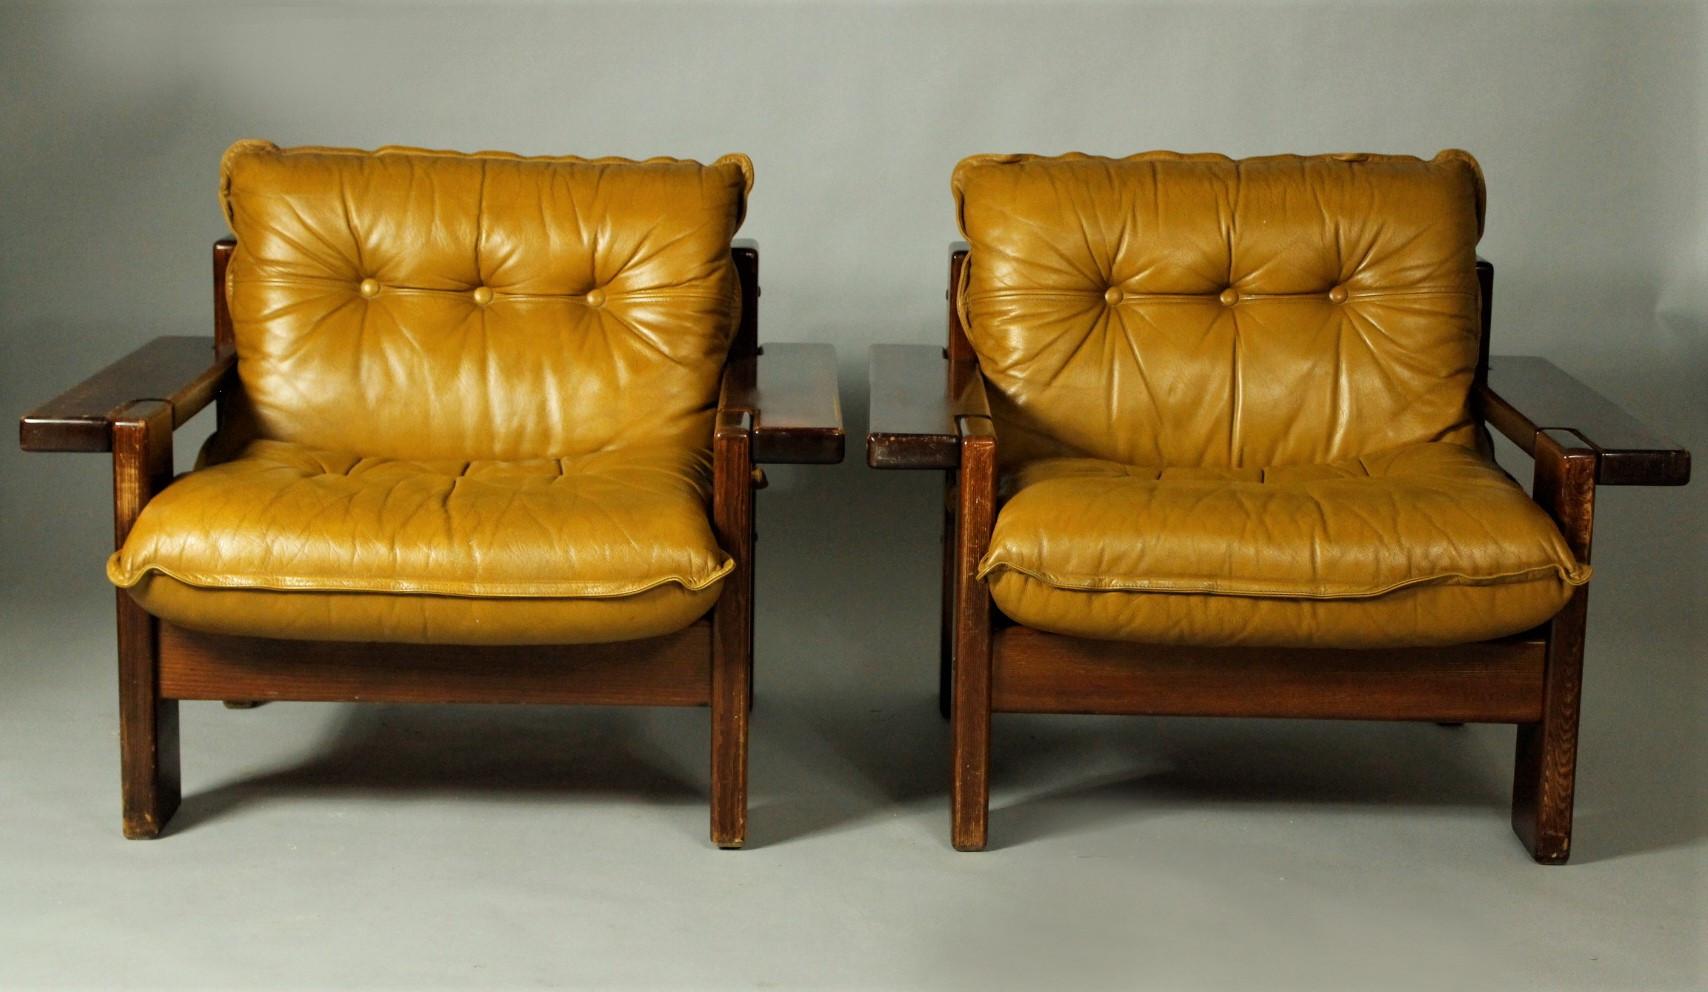 Pair of leather club chairs from the 1970s, manufactured by Vilka Elamisen Iloksi, Finland. They are in good original vintage condition with patina. Base is made from nordic pine and vinyl, leather cushions.